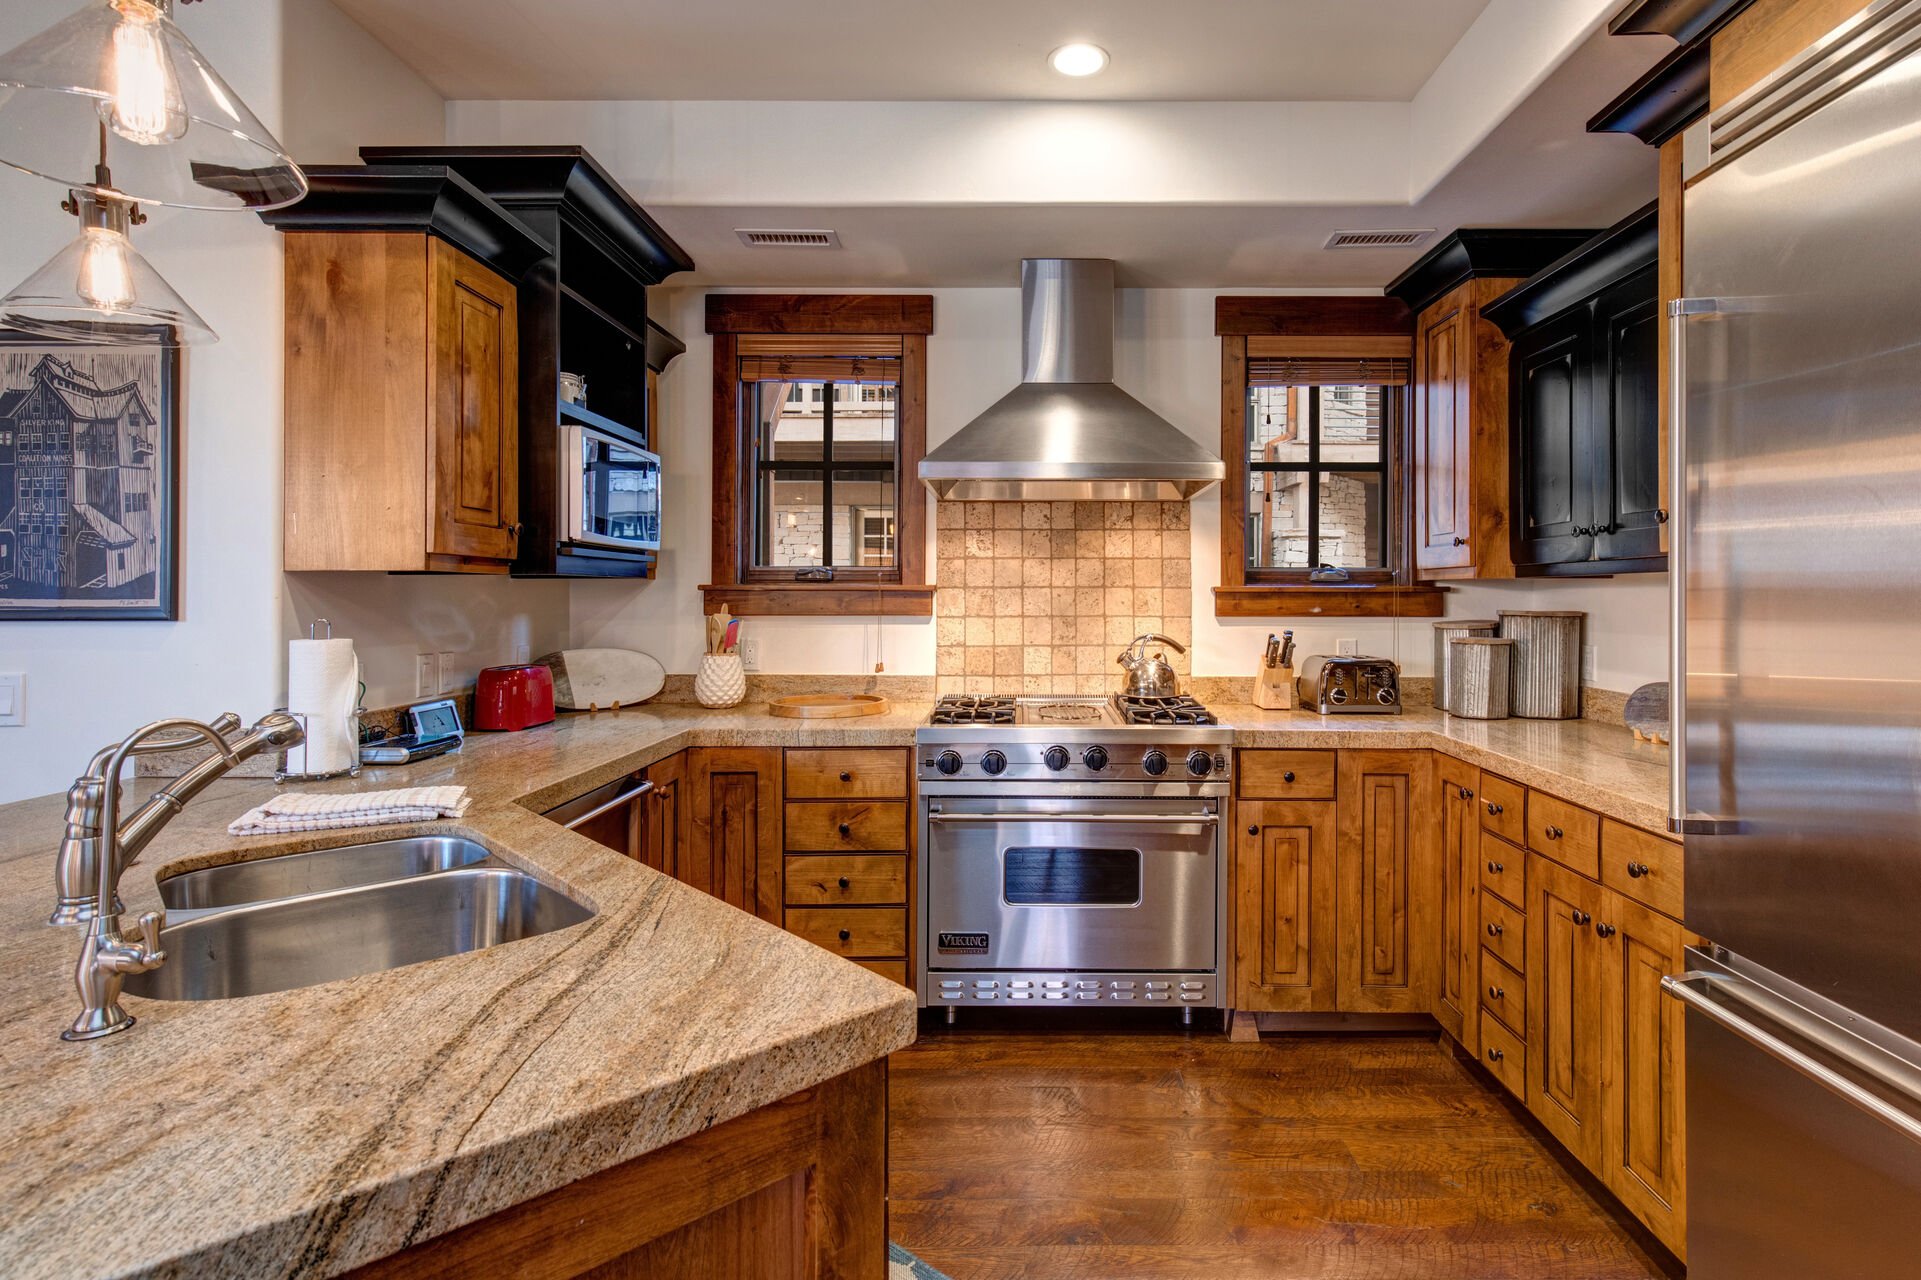 Fully Equipped Gourmet Kitchen with Viking Appliances and Hardwood Floors